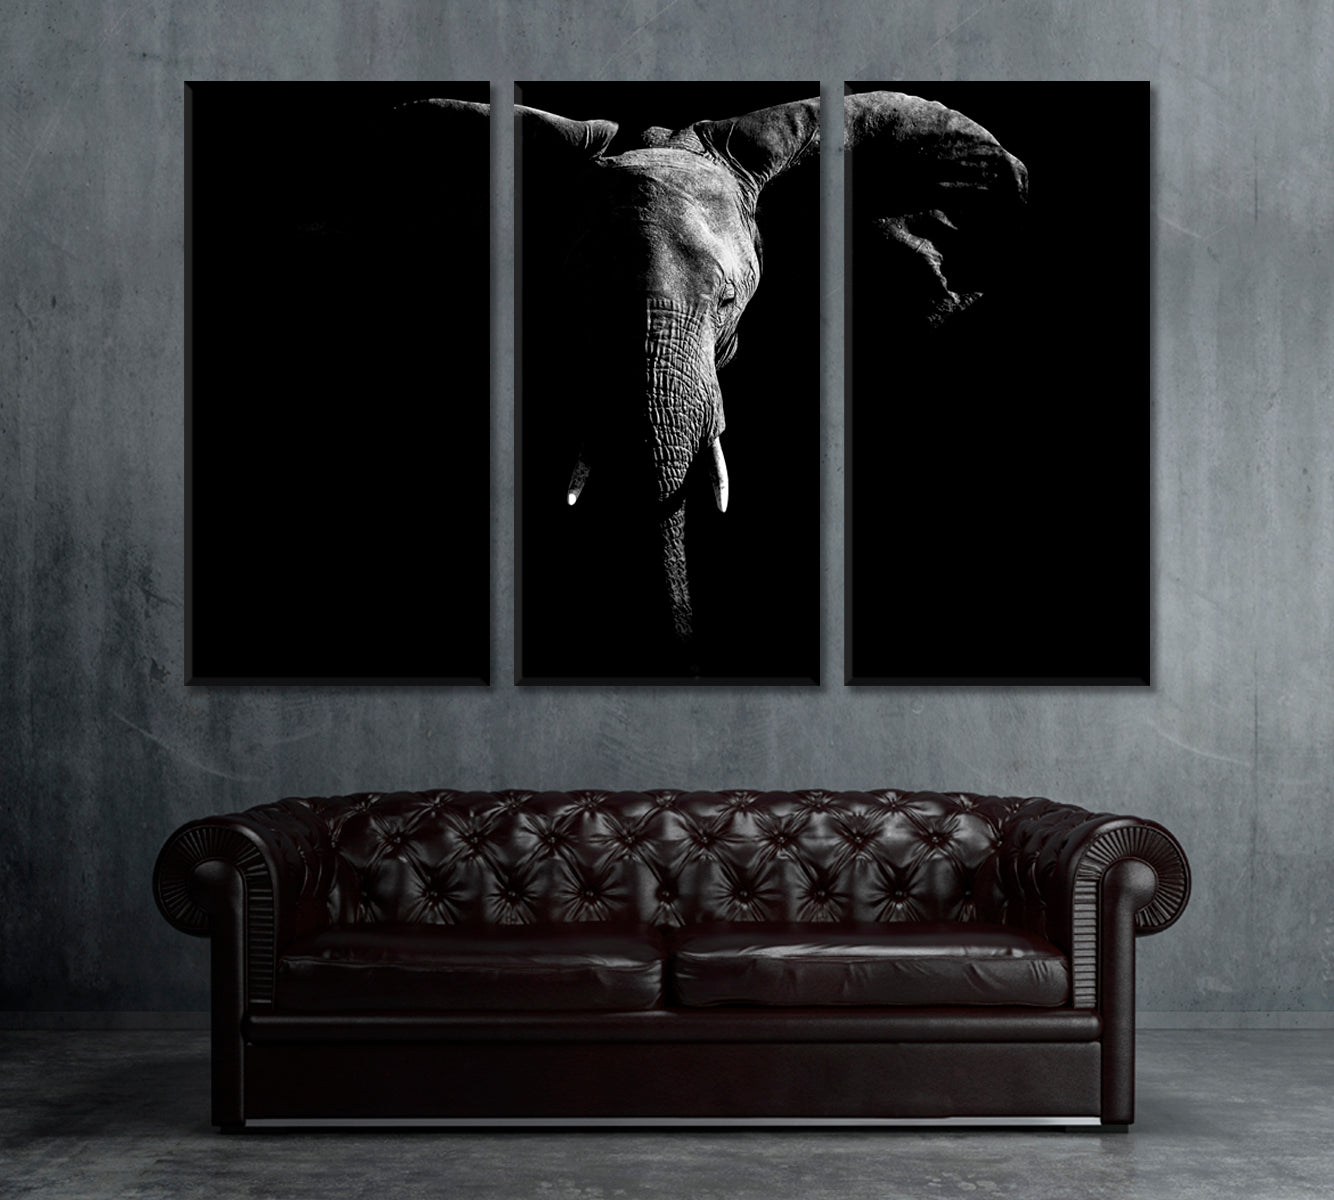 African Elephant Silhouette Canvas Print ArtLexy 3 Panels 36"x24" inches 